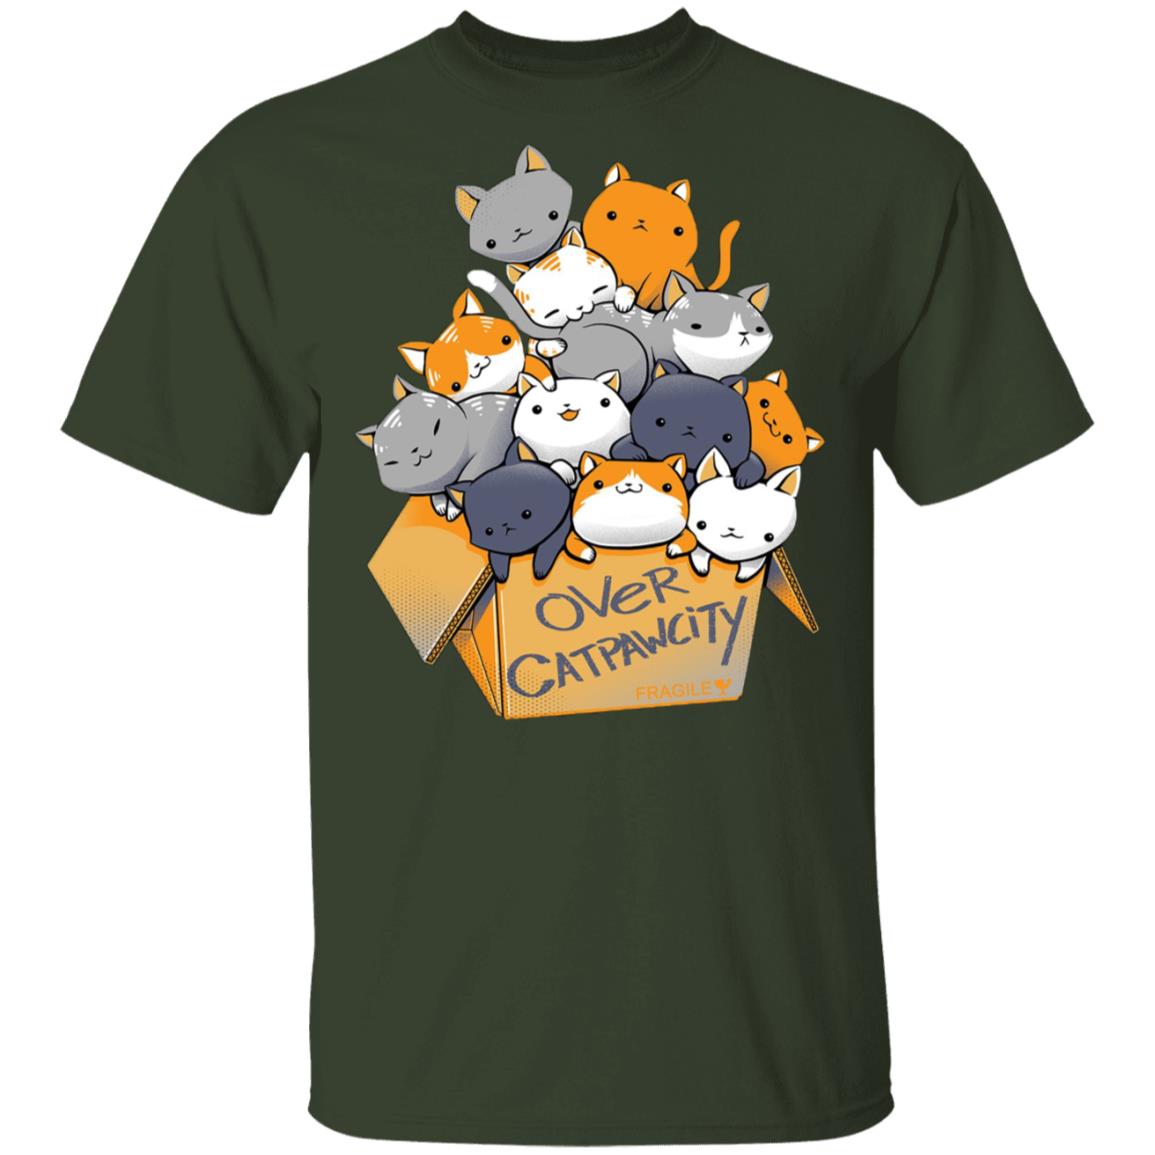 Over Catpawcity Cat Lover Shirts - AmazeTees - Trending Shirts For Everyone